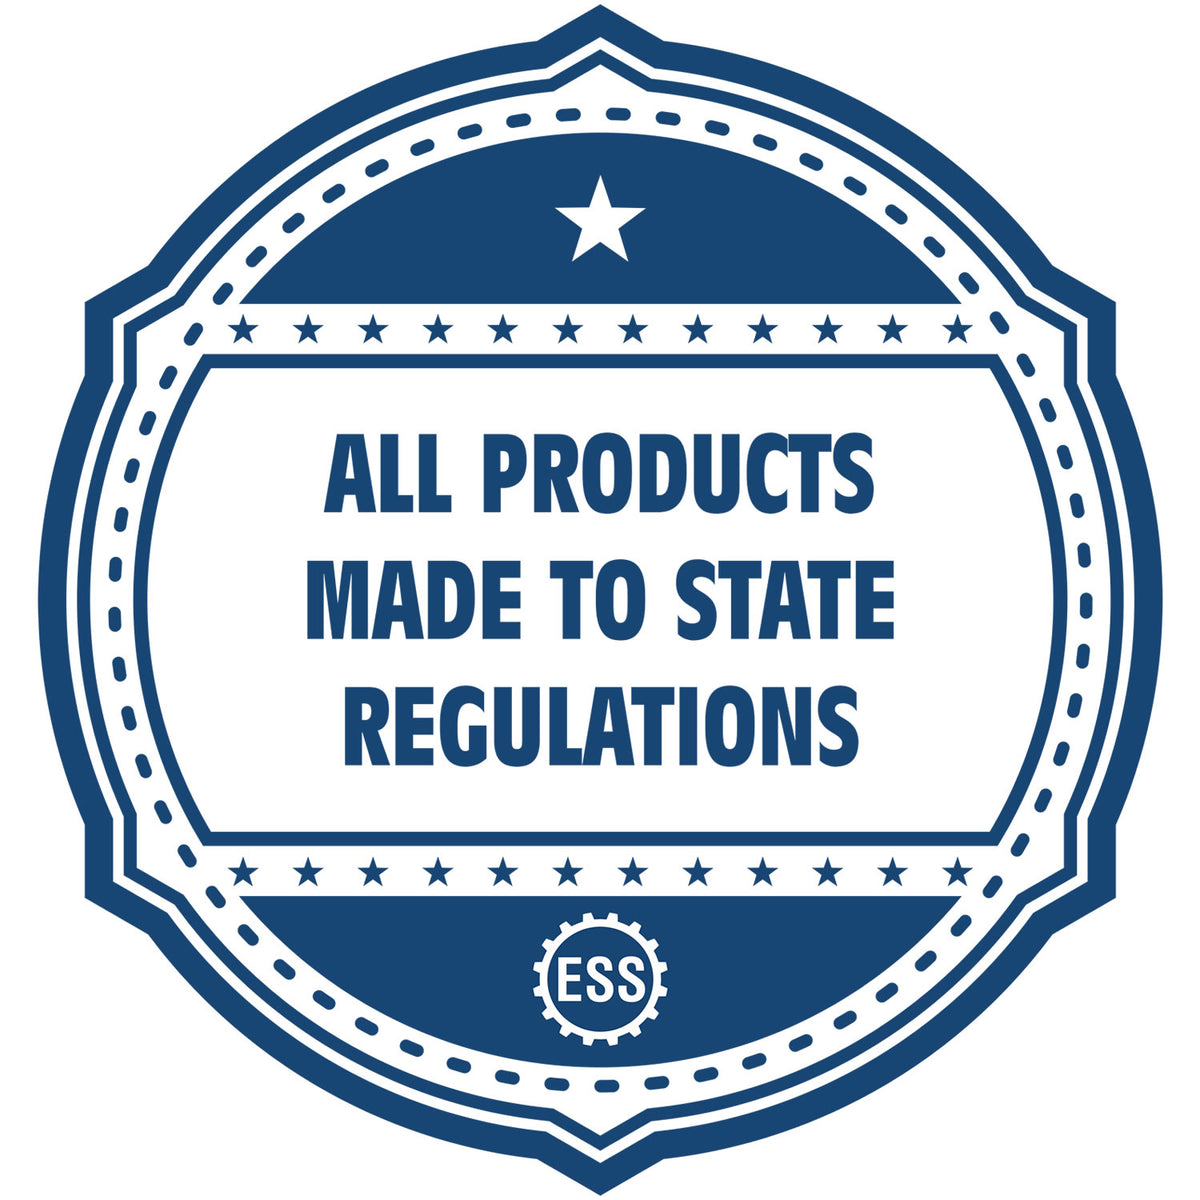 A blue icon or badge for the Heavy Duty Cast Iron Colorado Geologist Seal Embosser showing that this product is made in compliance with state regulations.